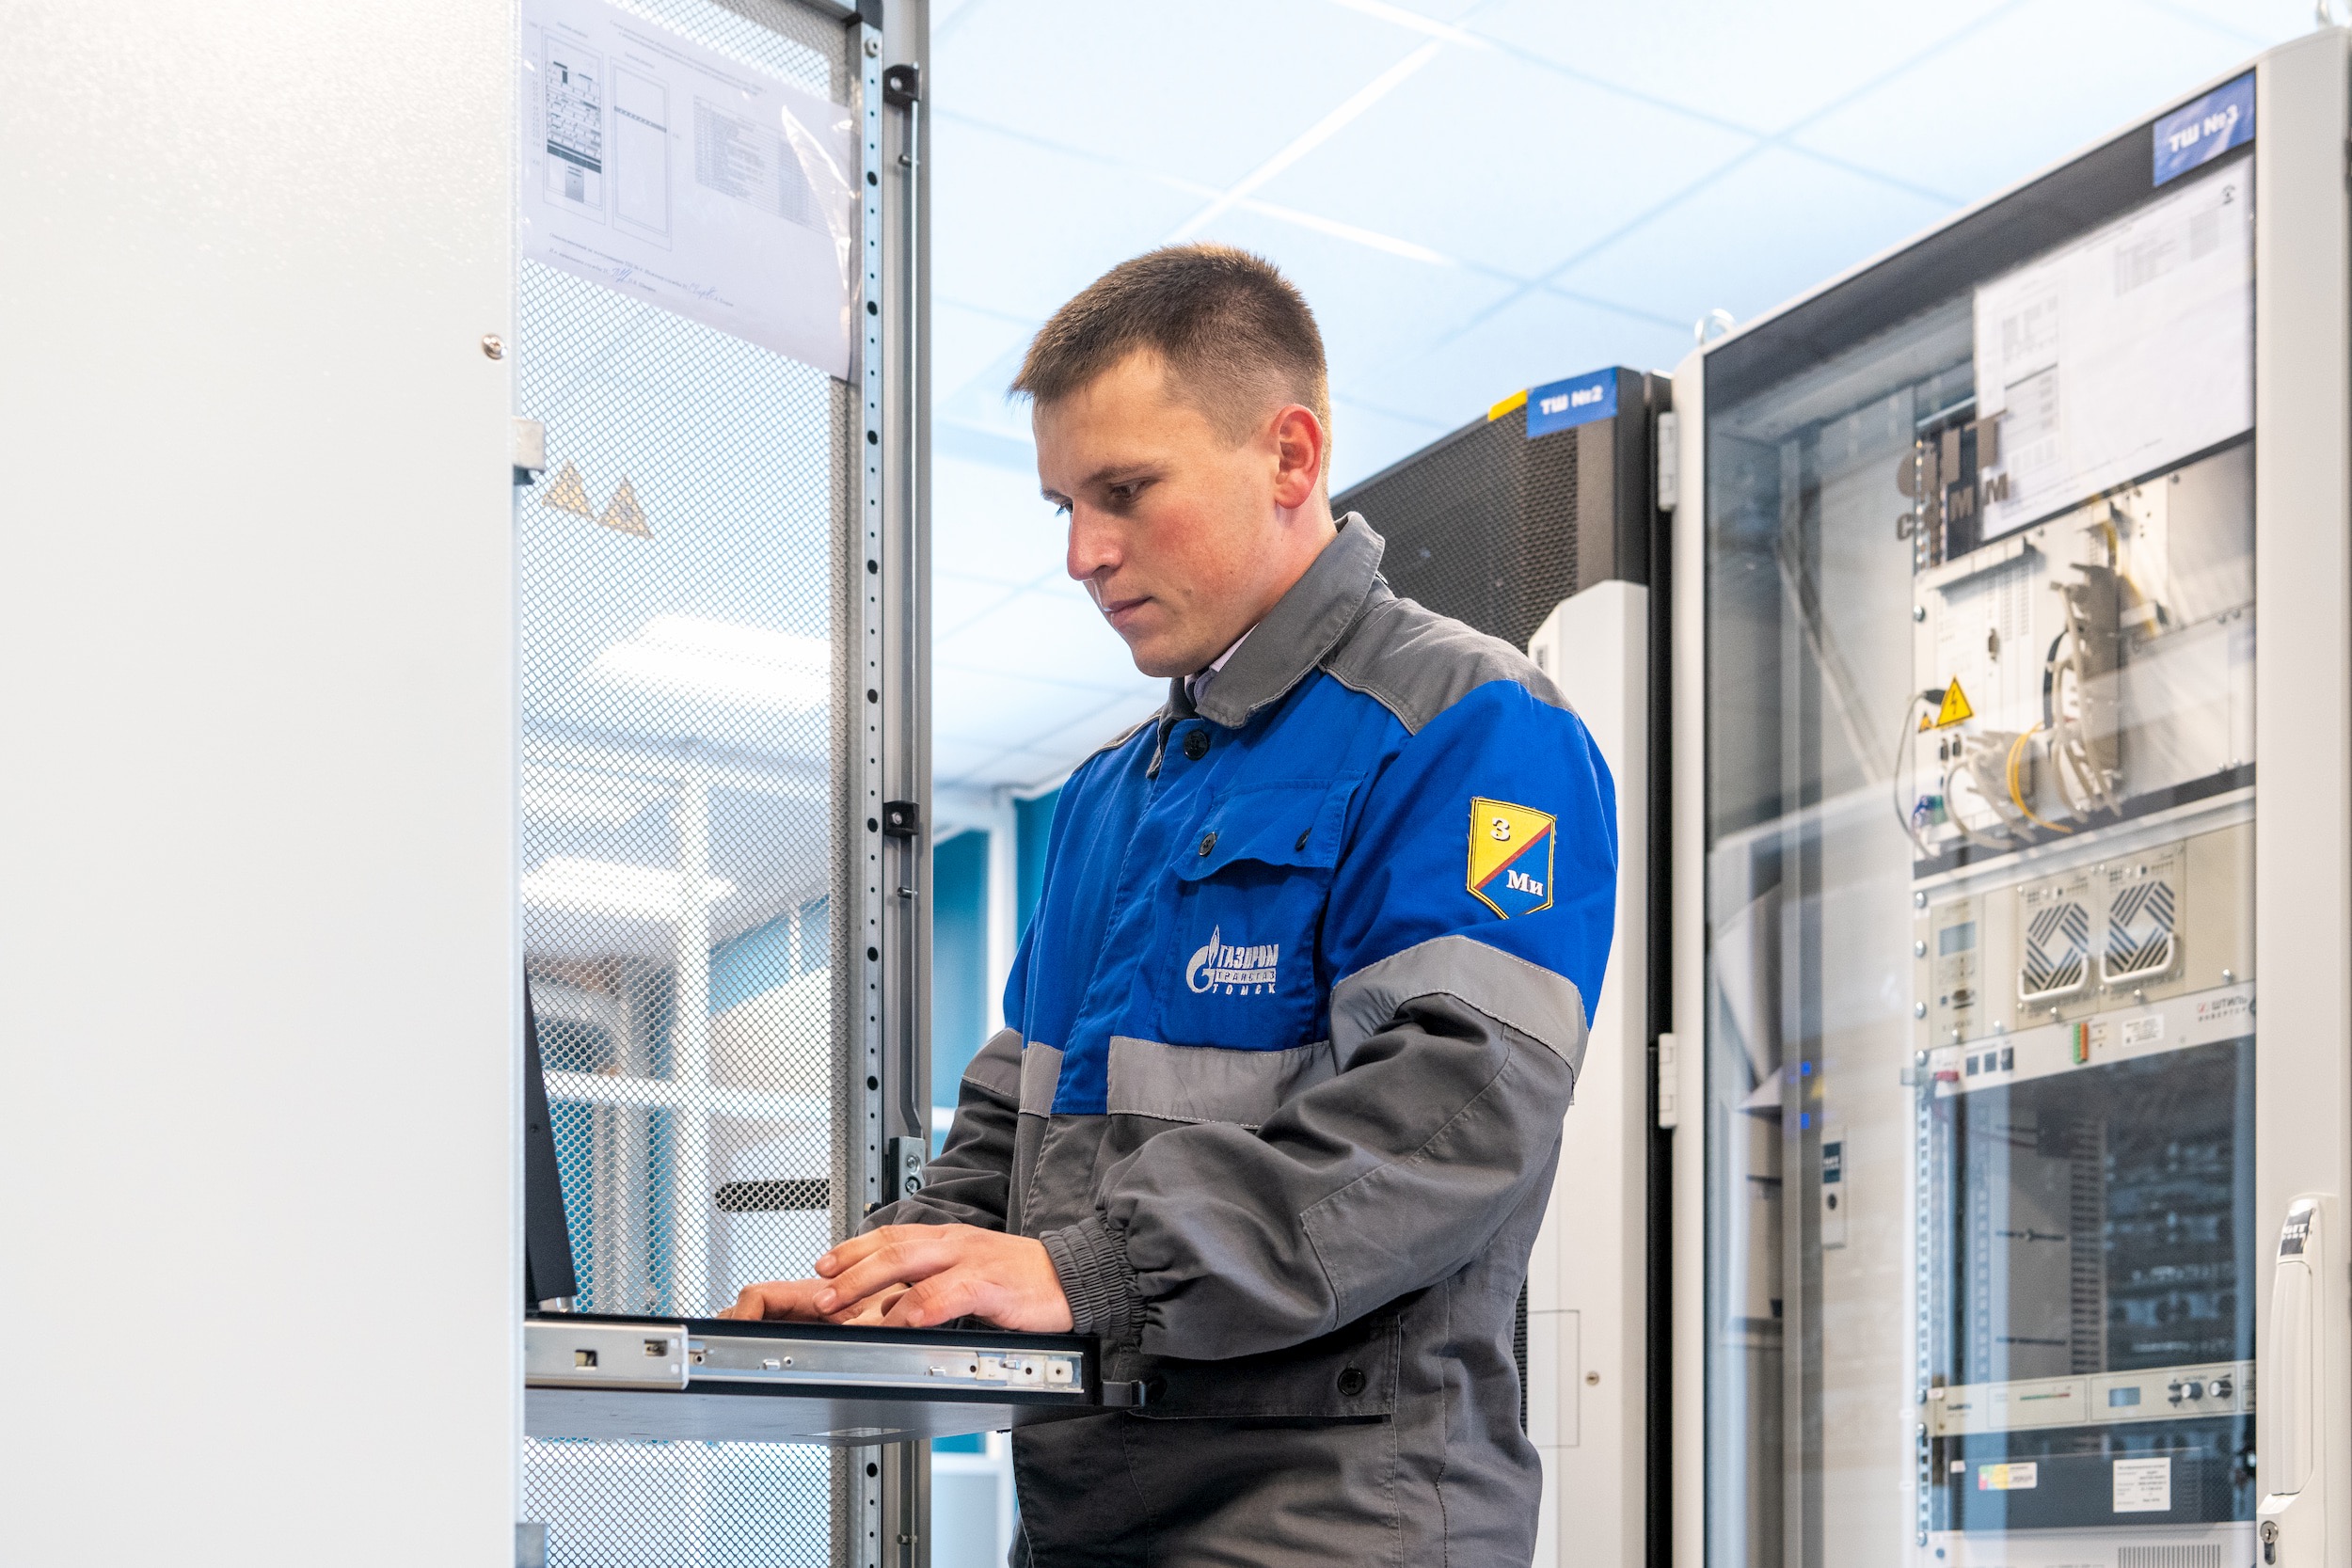 Digital technologies prove to be important tool in achieving Gazprom’s strategic goals